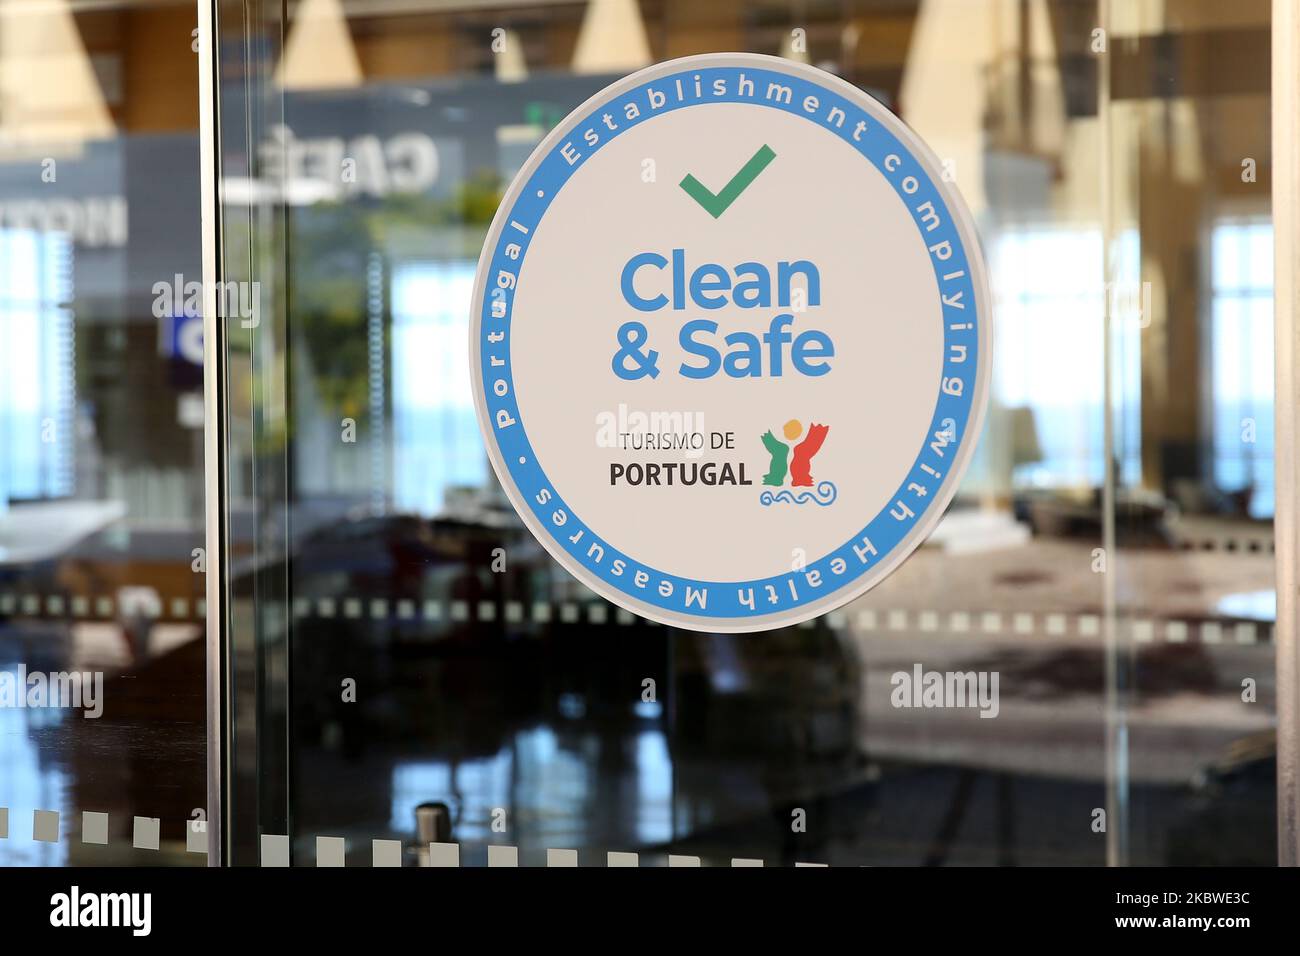 A Clean and Safe stamp is seen at a Hotel door in Portimao, Algarve region, Portugal on July 29, 2020. Considering the widespread concern in the resumption of economic and social activity, Turismo de Portugal created a Clean and Safe stamp of approval to distinguish tourist activities which are compliant with hygiene and cleaning requirements for the prevention and control of COVID-19 and other possible infections. (Photo by Pedro FiÃºza/NurPhoto) Stock Photo